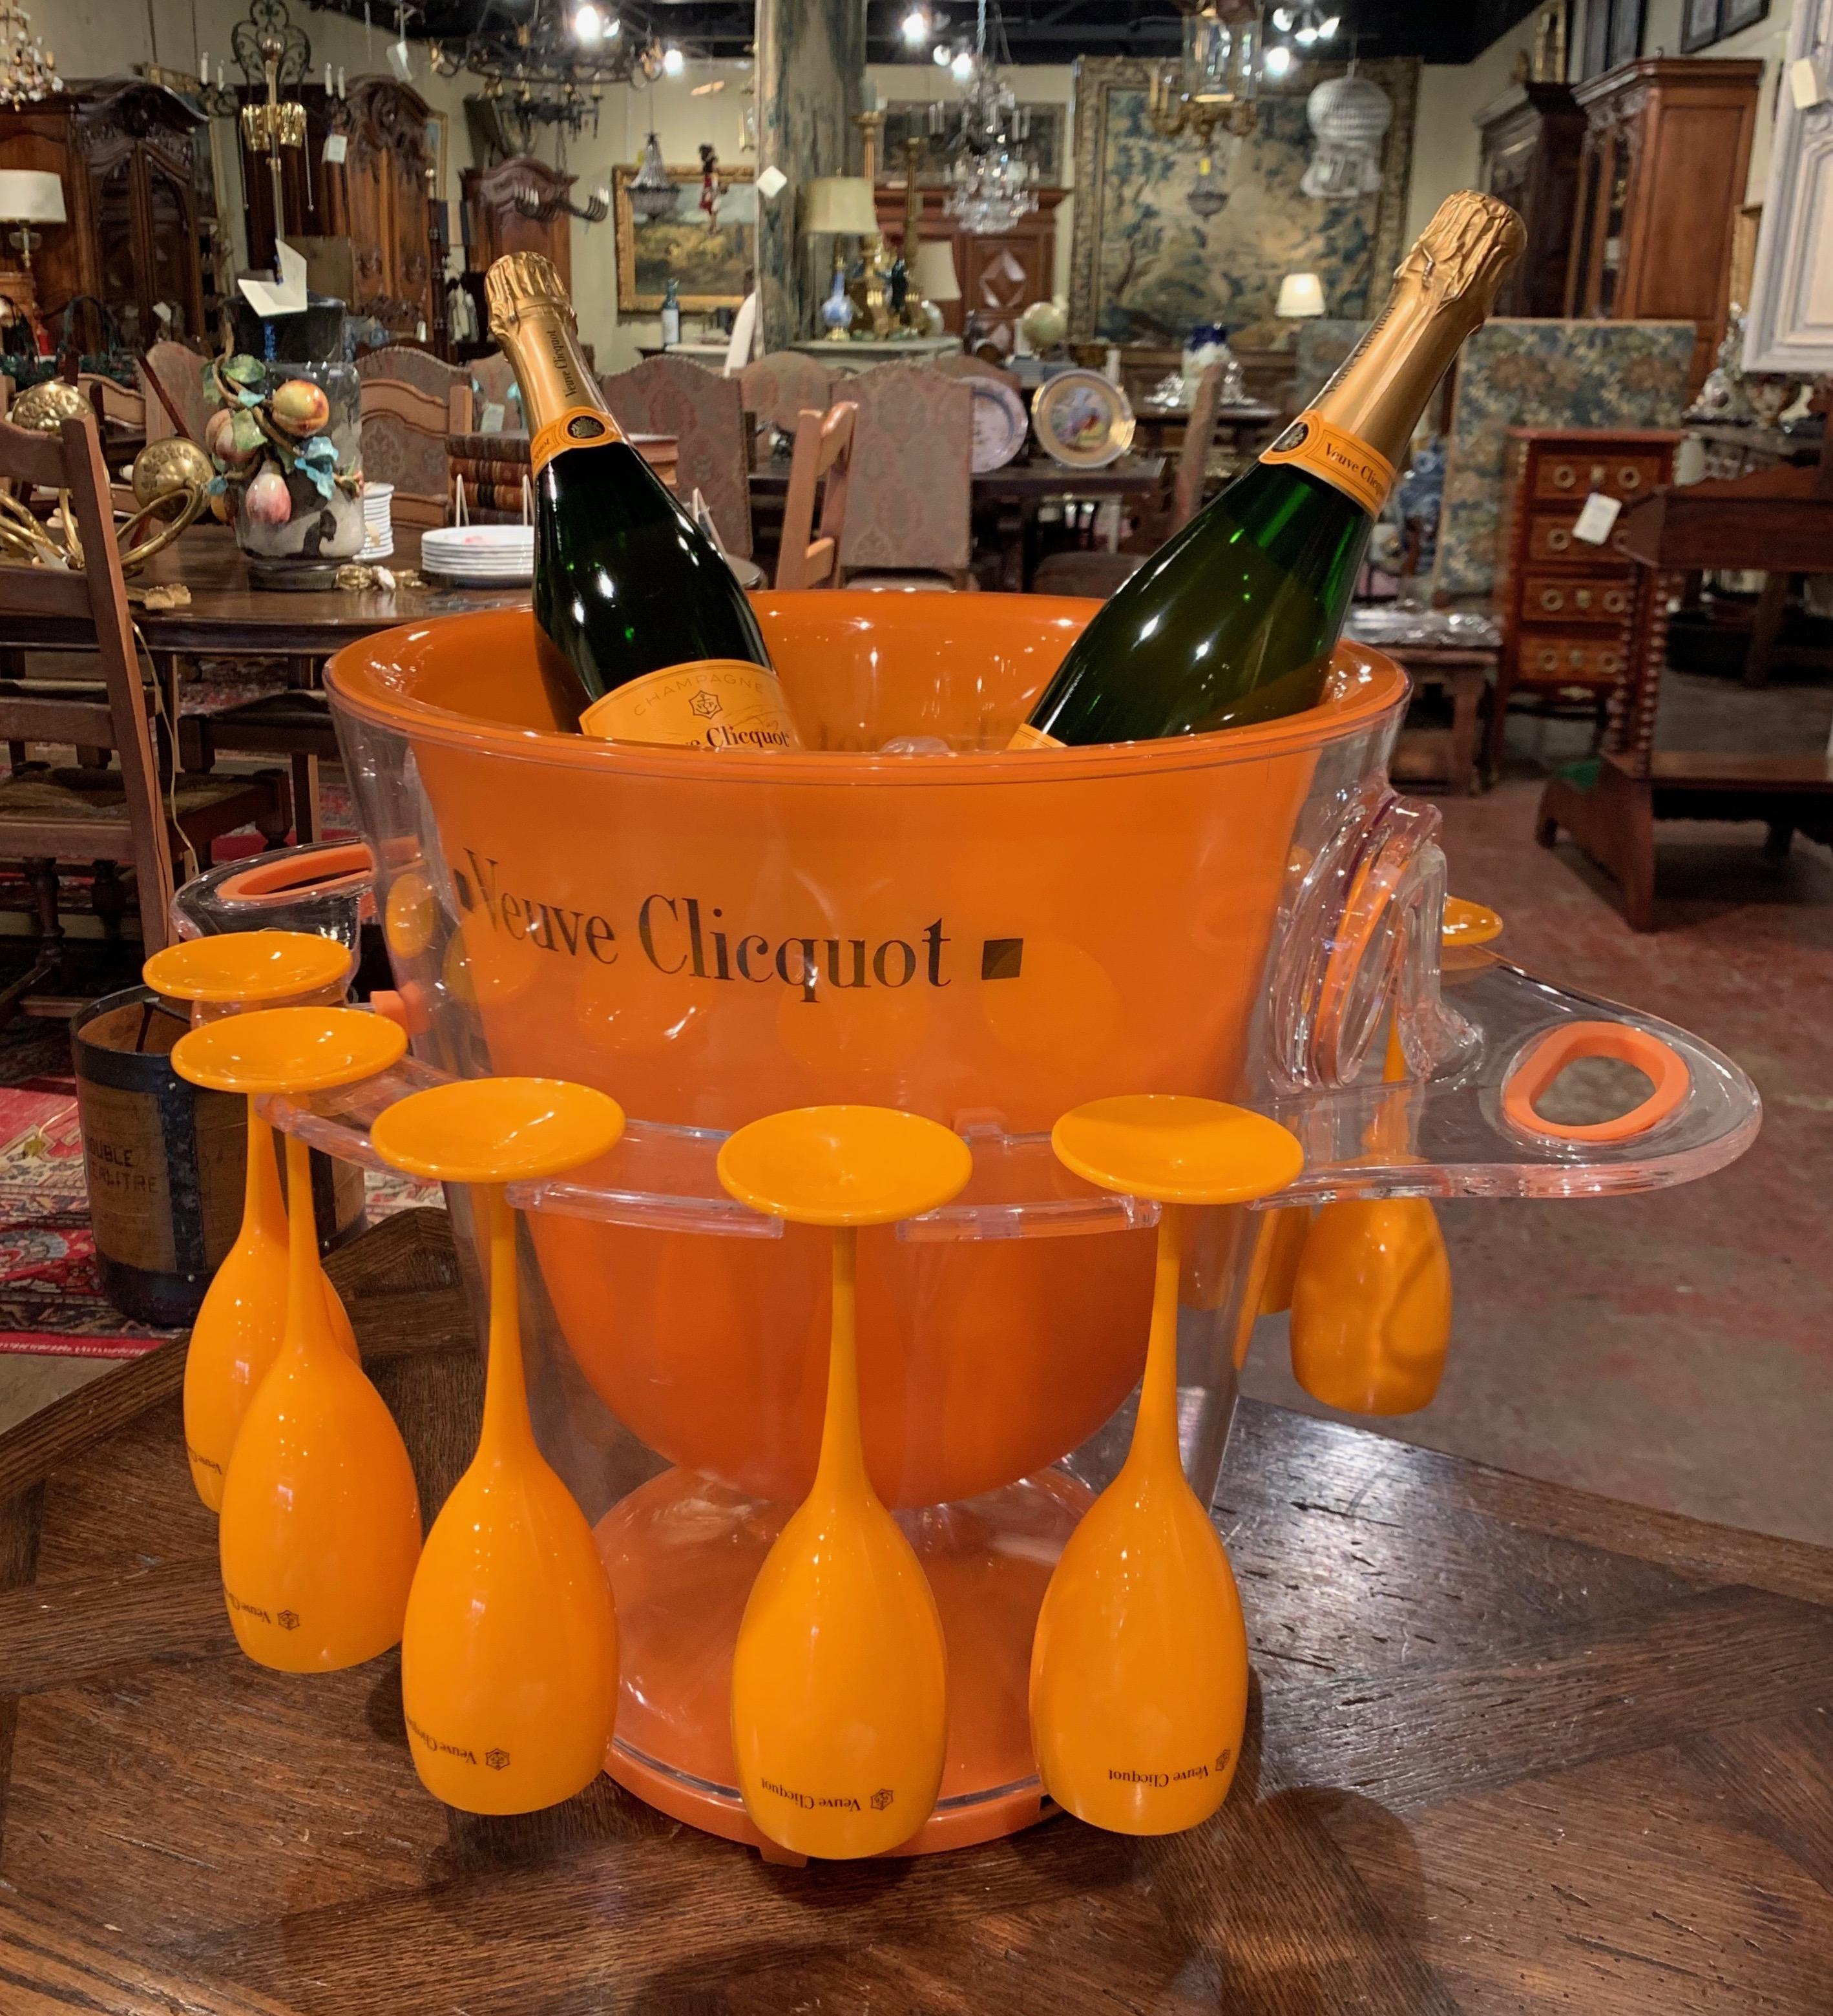 Decorate a pool wet bar with this elegant champagne cooler with matching glasses; crafted in France, circa 1980 by the iconic House of Veuve Clicquot, the two-piece container features an orange bowl decorated with clear handles and slots for ten